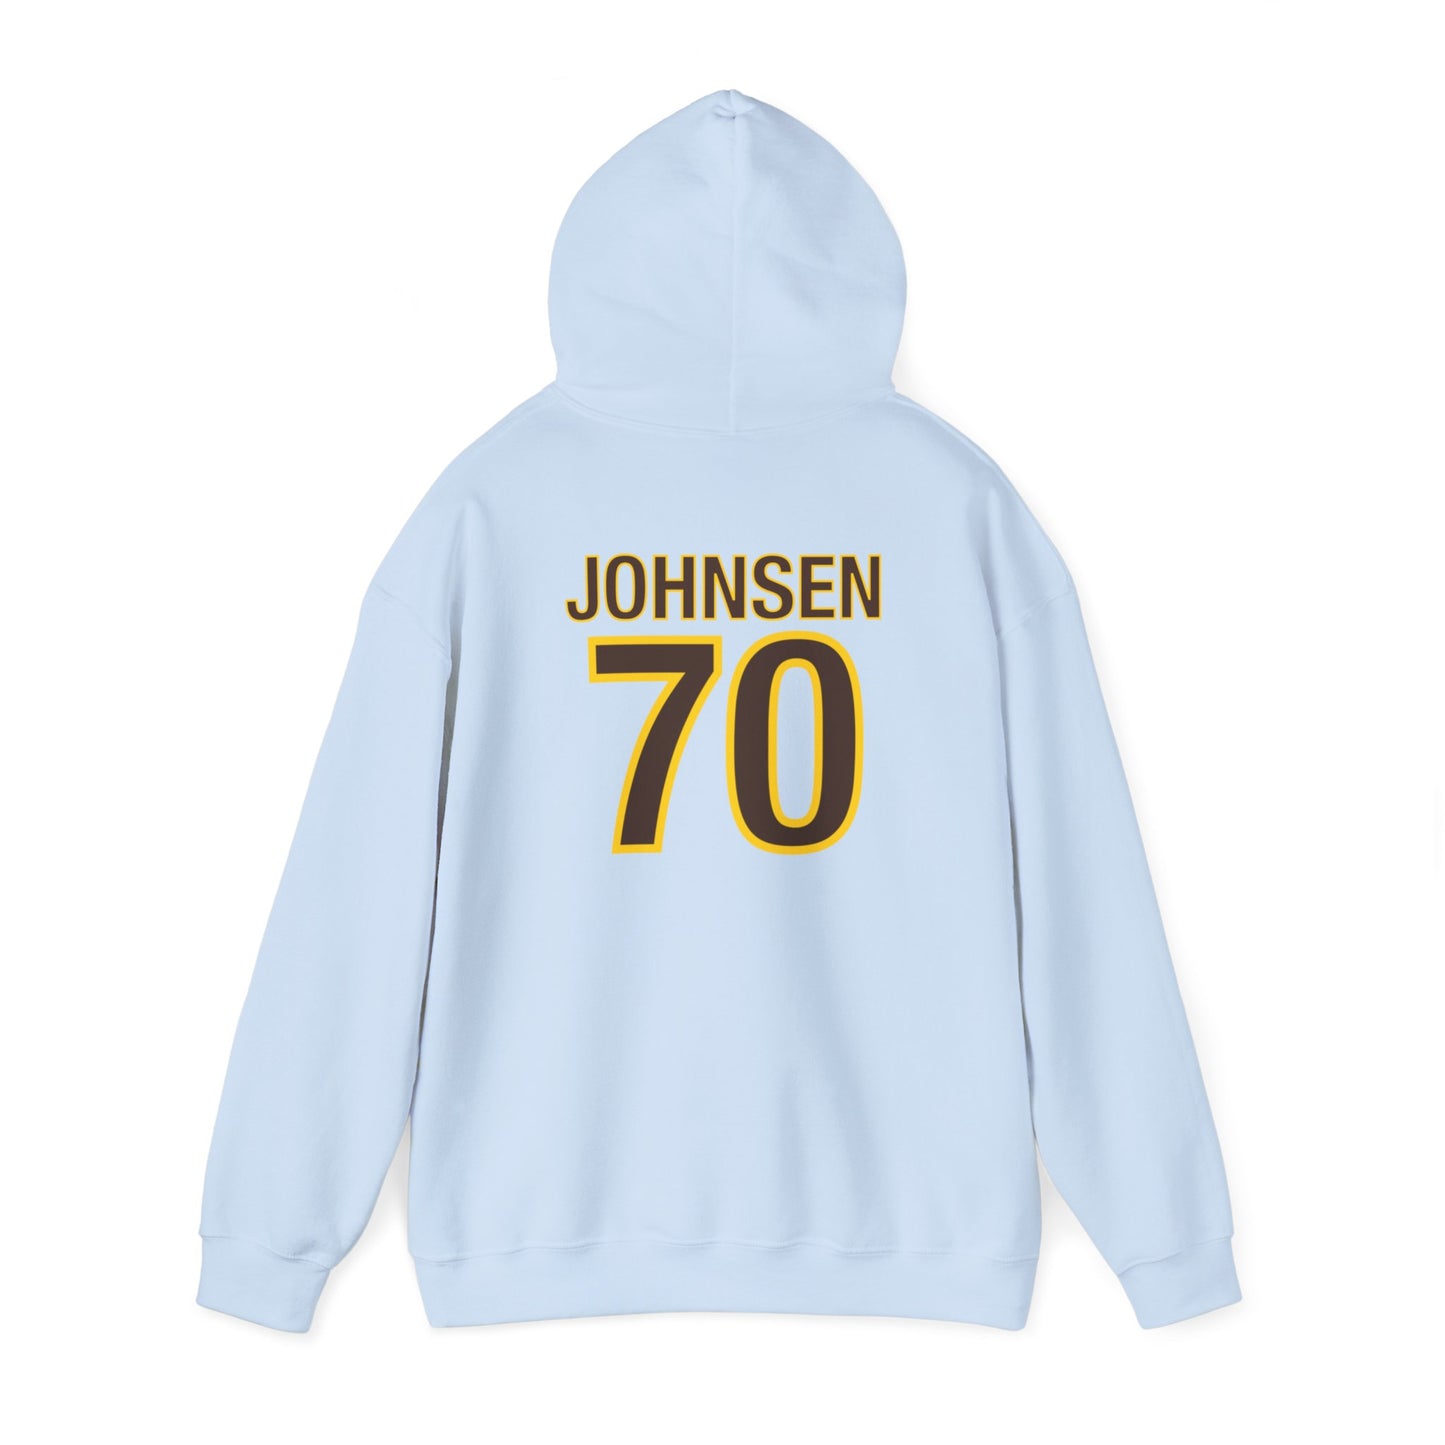 7 Zero is Our Hero With 70 and Johnson On The Back